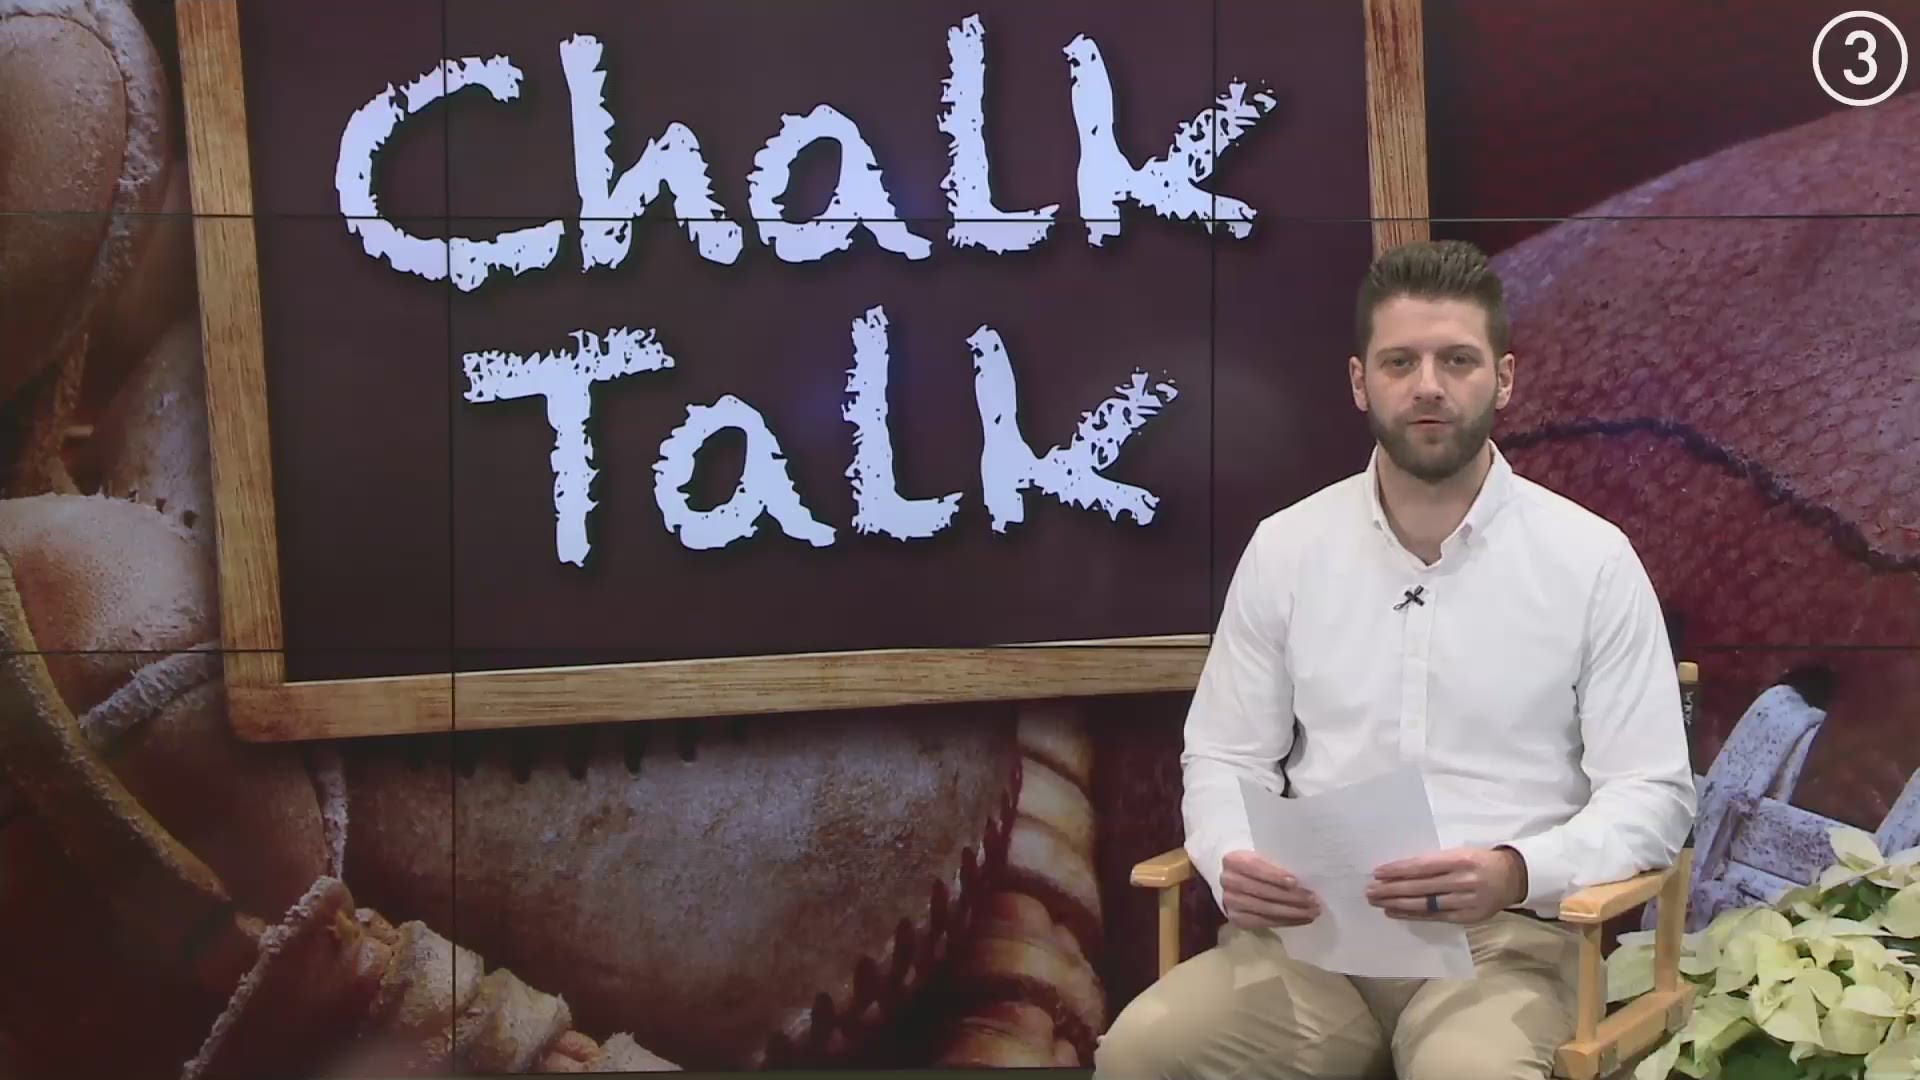 On the 15th episode of WKYC's Chalk Talk, Ben Axelrod makes his picks for Week 15 of the NFL.